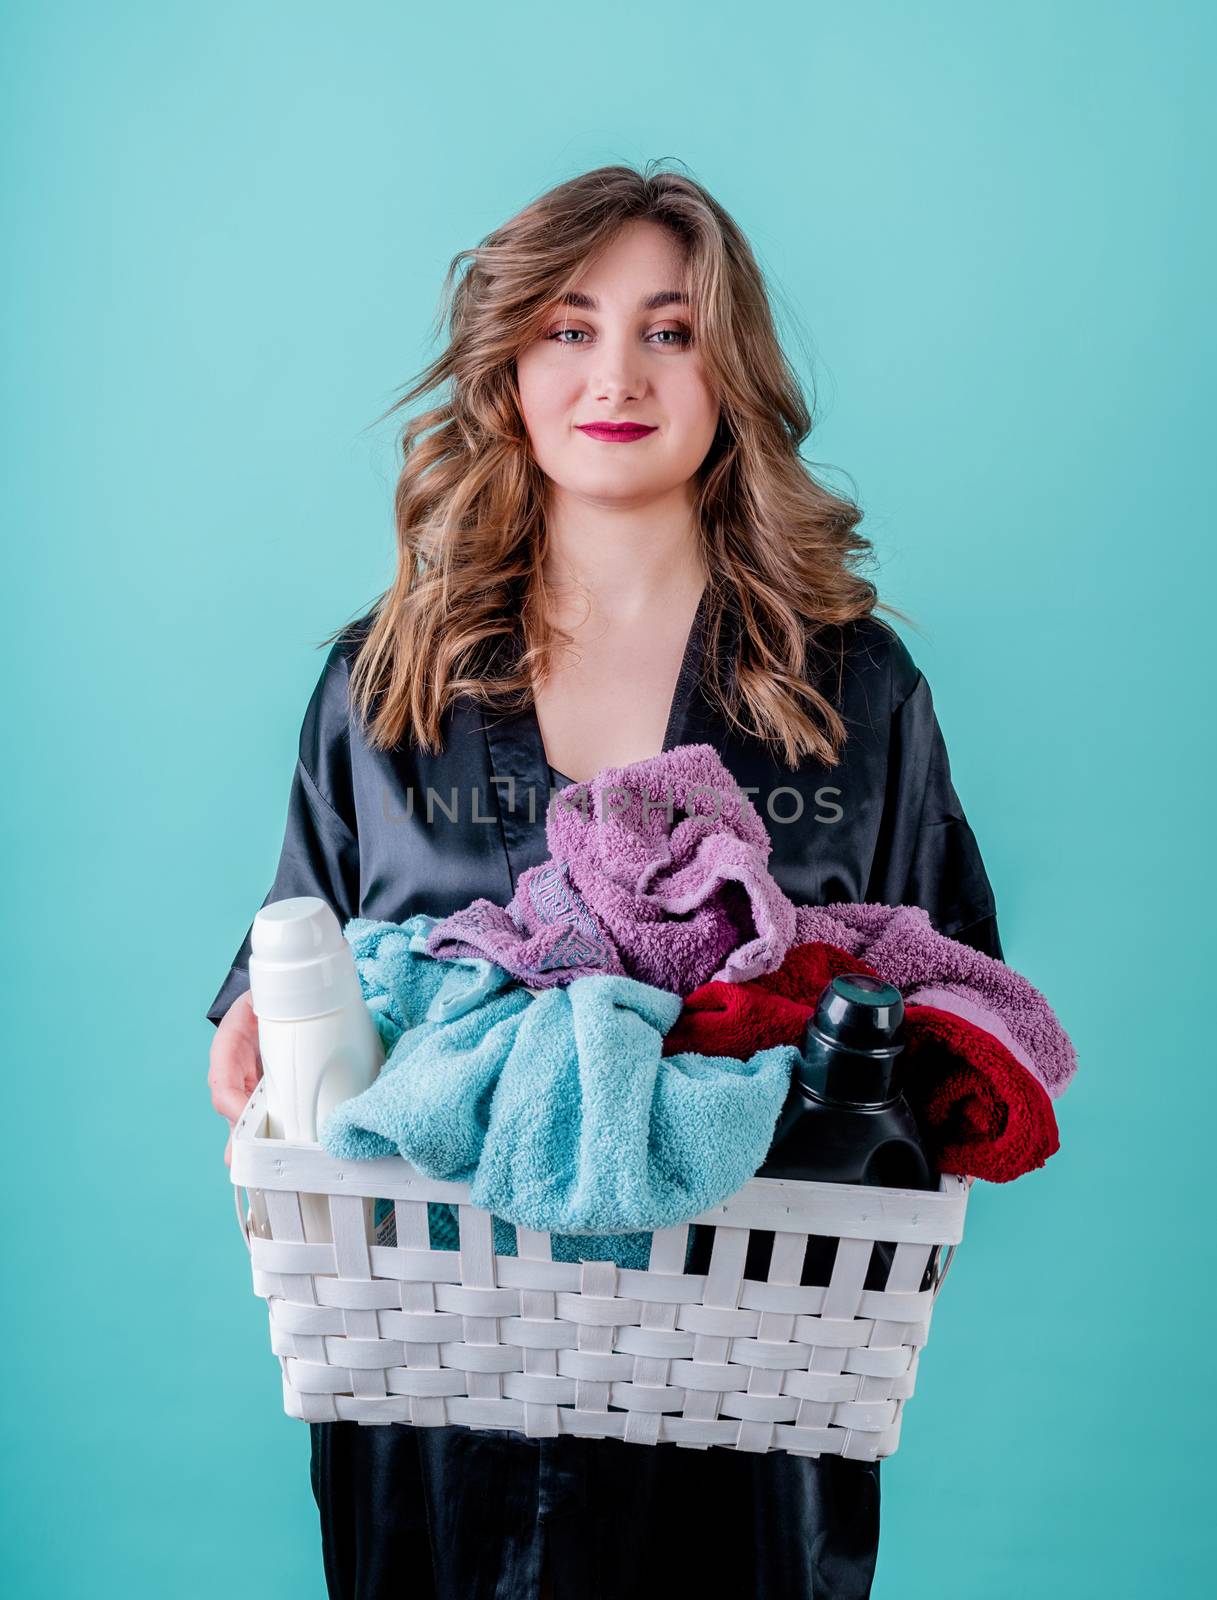 Laundry concept. Happy housewife holding a basket of clothes ready for laundry isolated on blue background